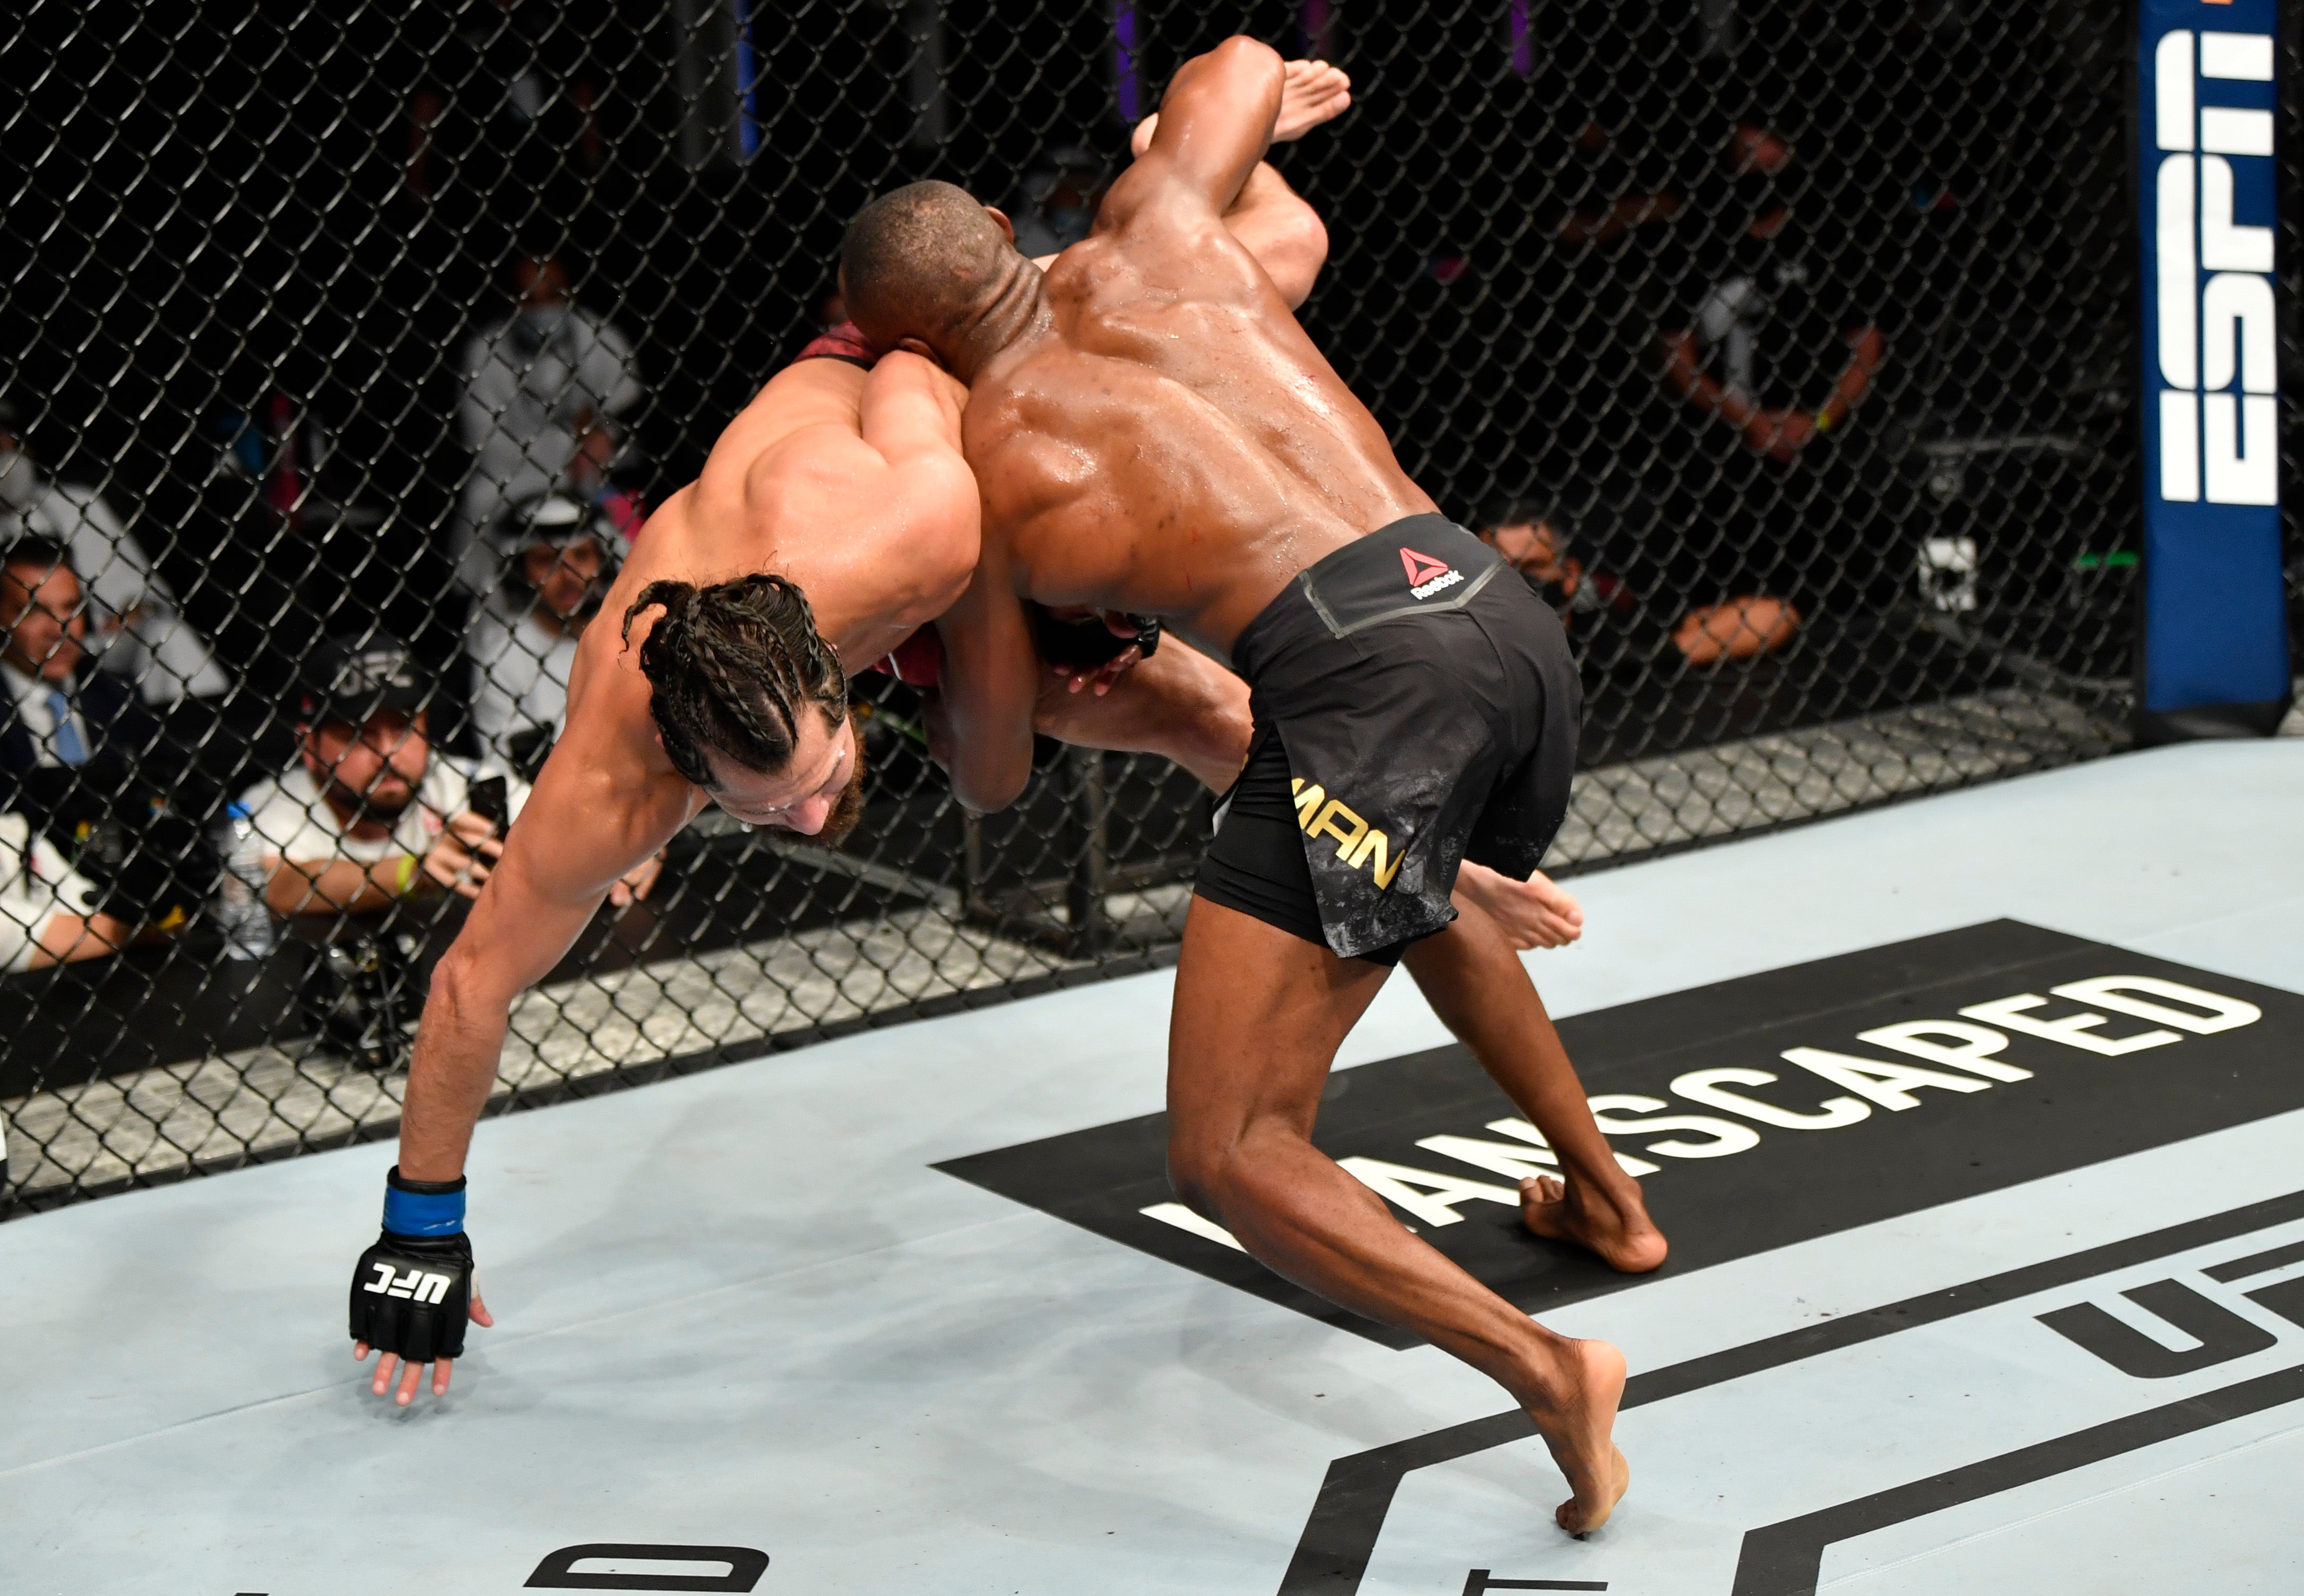 Kamaru Usman outwrestled Masvidal to retain his welterweight title last July